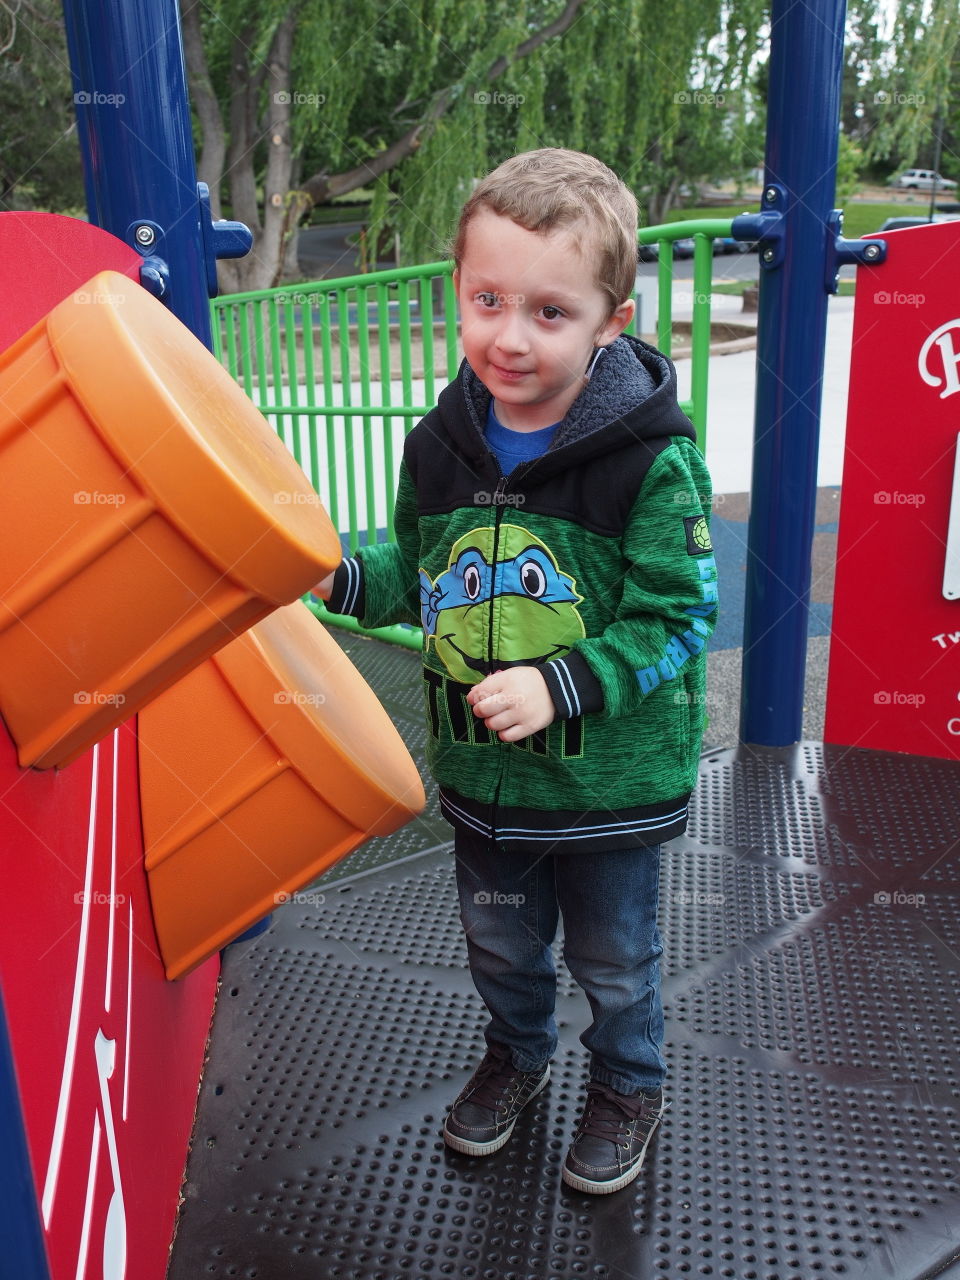 A little boy enthusiastically plays on the plastic drums on a play structure in the park. 